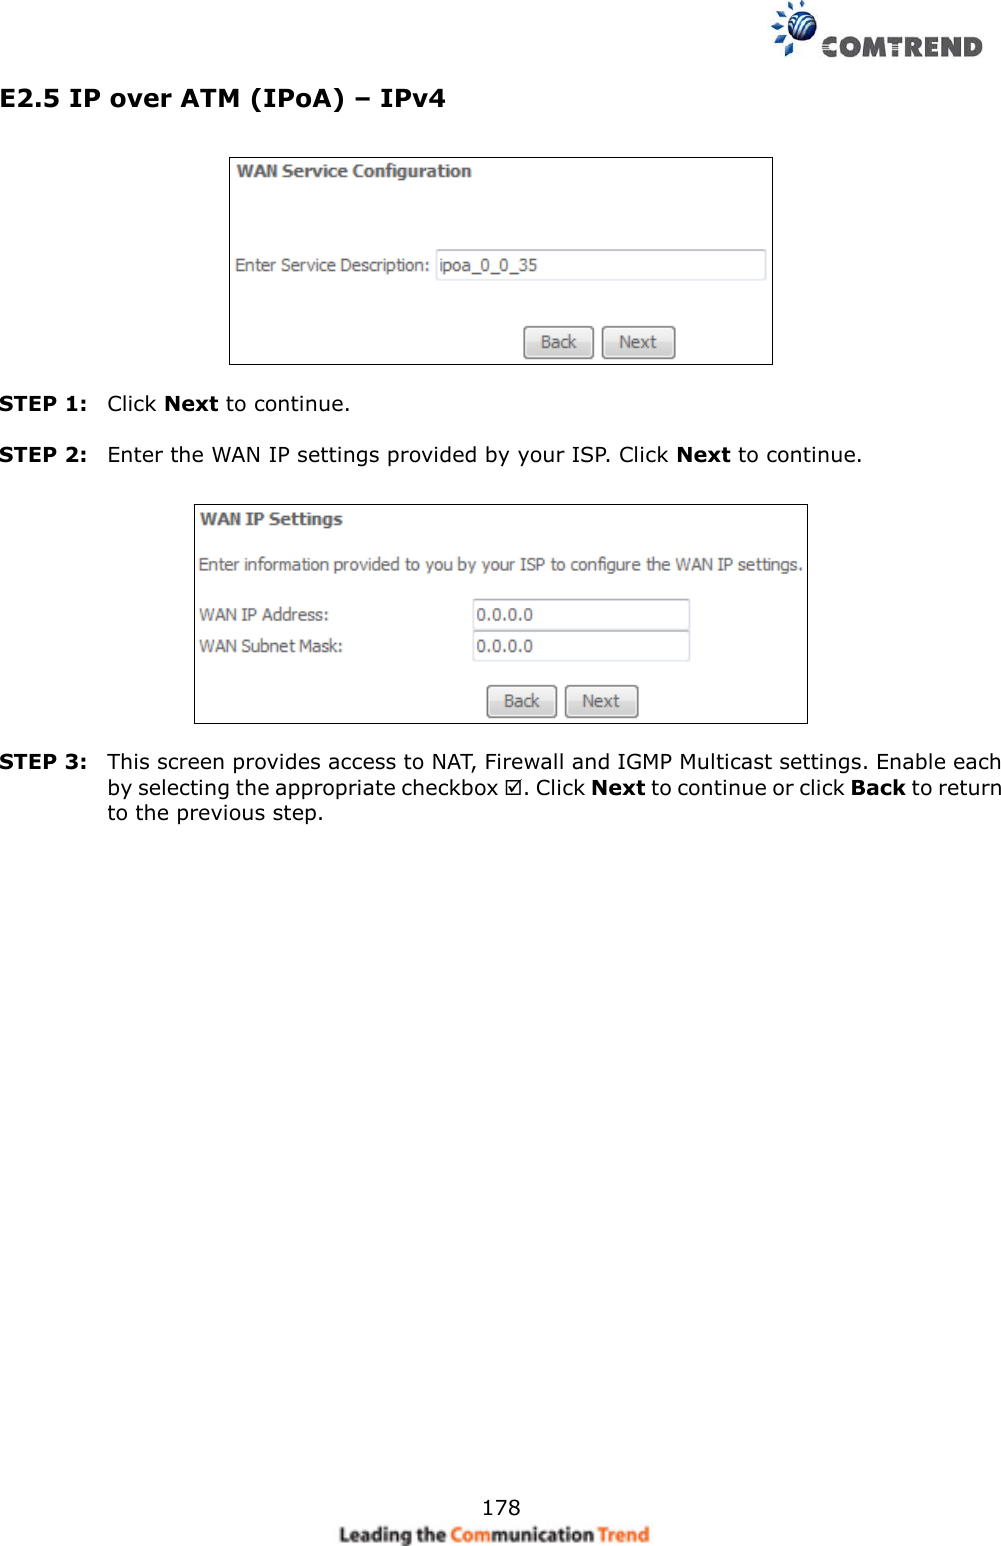     178 E2.5 IP over ATM (IPoA) – IPv4    STEP 1:  Click Next to continue.  STEP 2:  Enter the WAN IP settings provided by your ISP. Click Next to continue.    STEP 3:  This screen provides access to NAT, Firewall and IGMP Multicast settings. Enable each by selecting the appropriate checkbox . Click Next to continue or click Back to return to the previous step.  